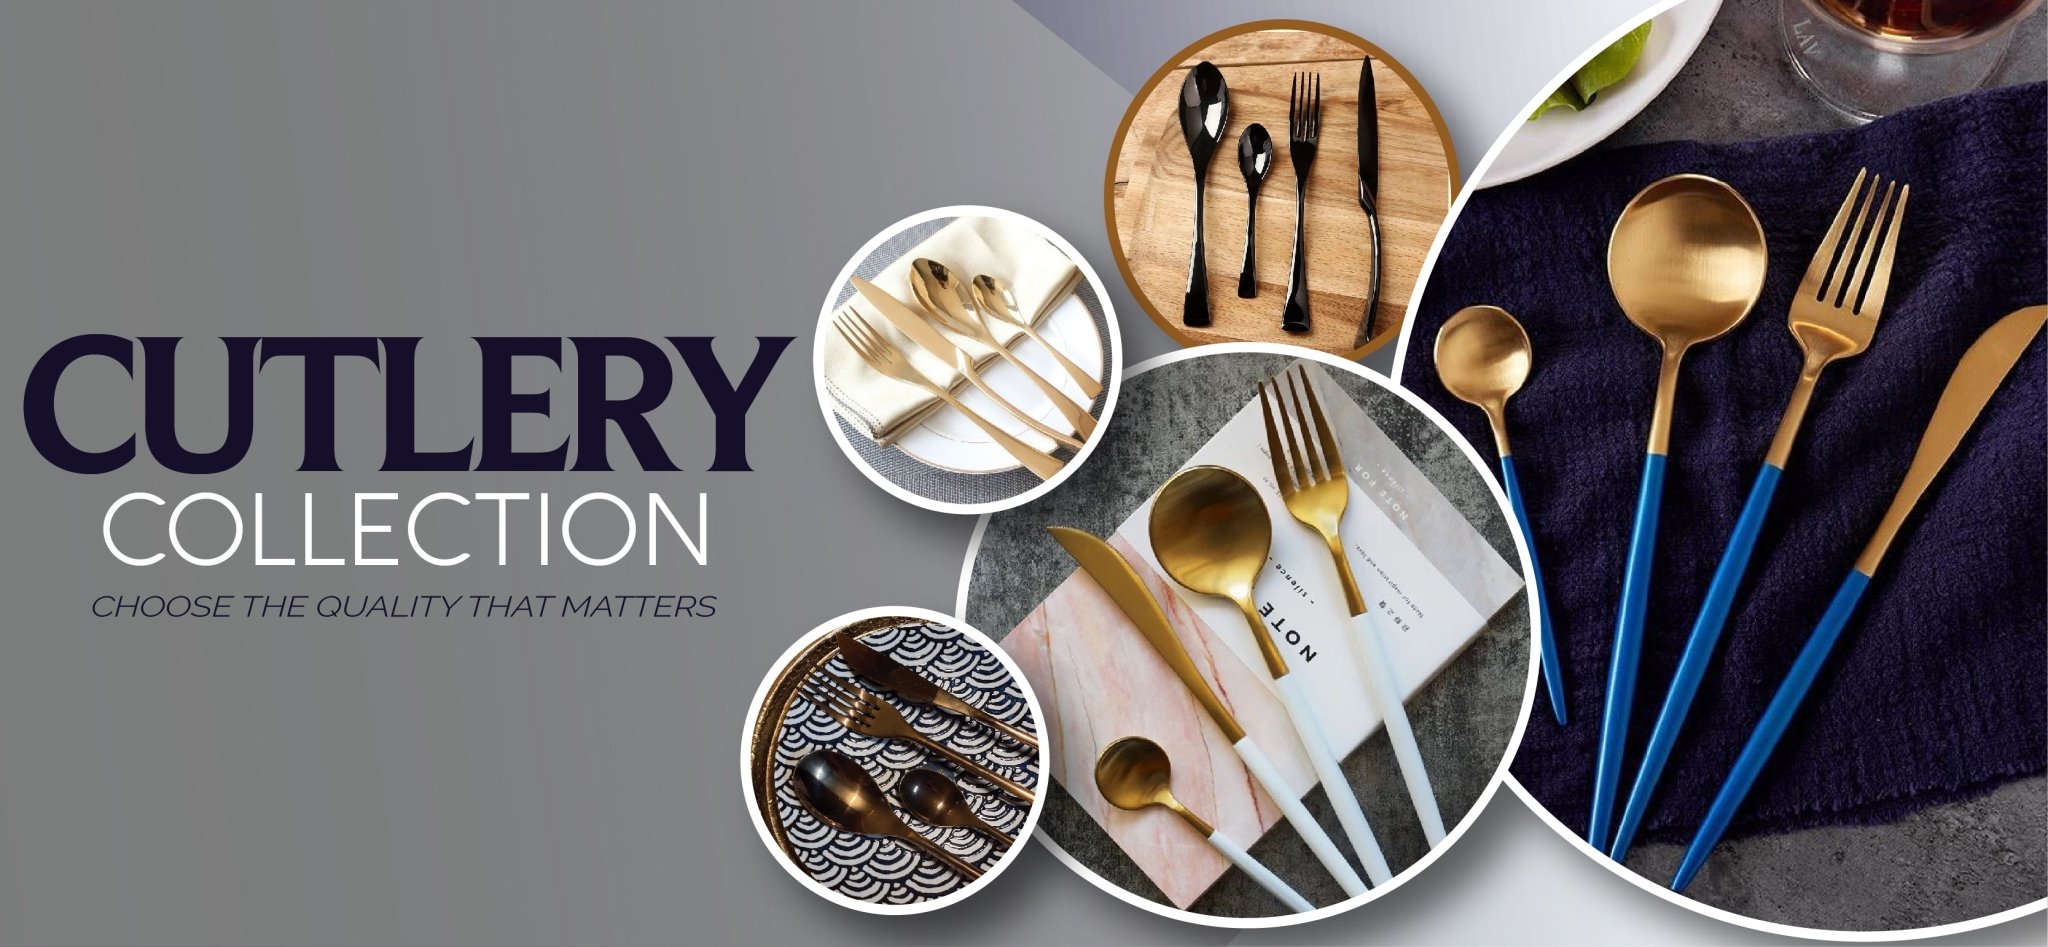 CUTLERY SETS | Needs Store